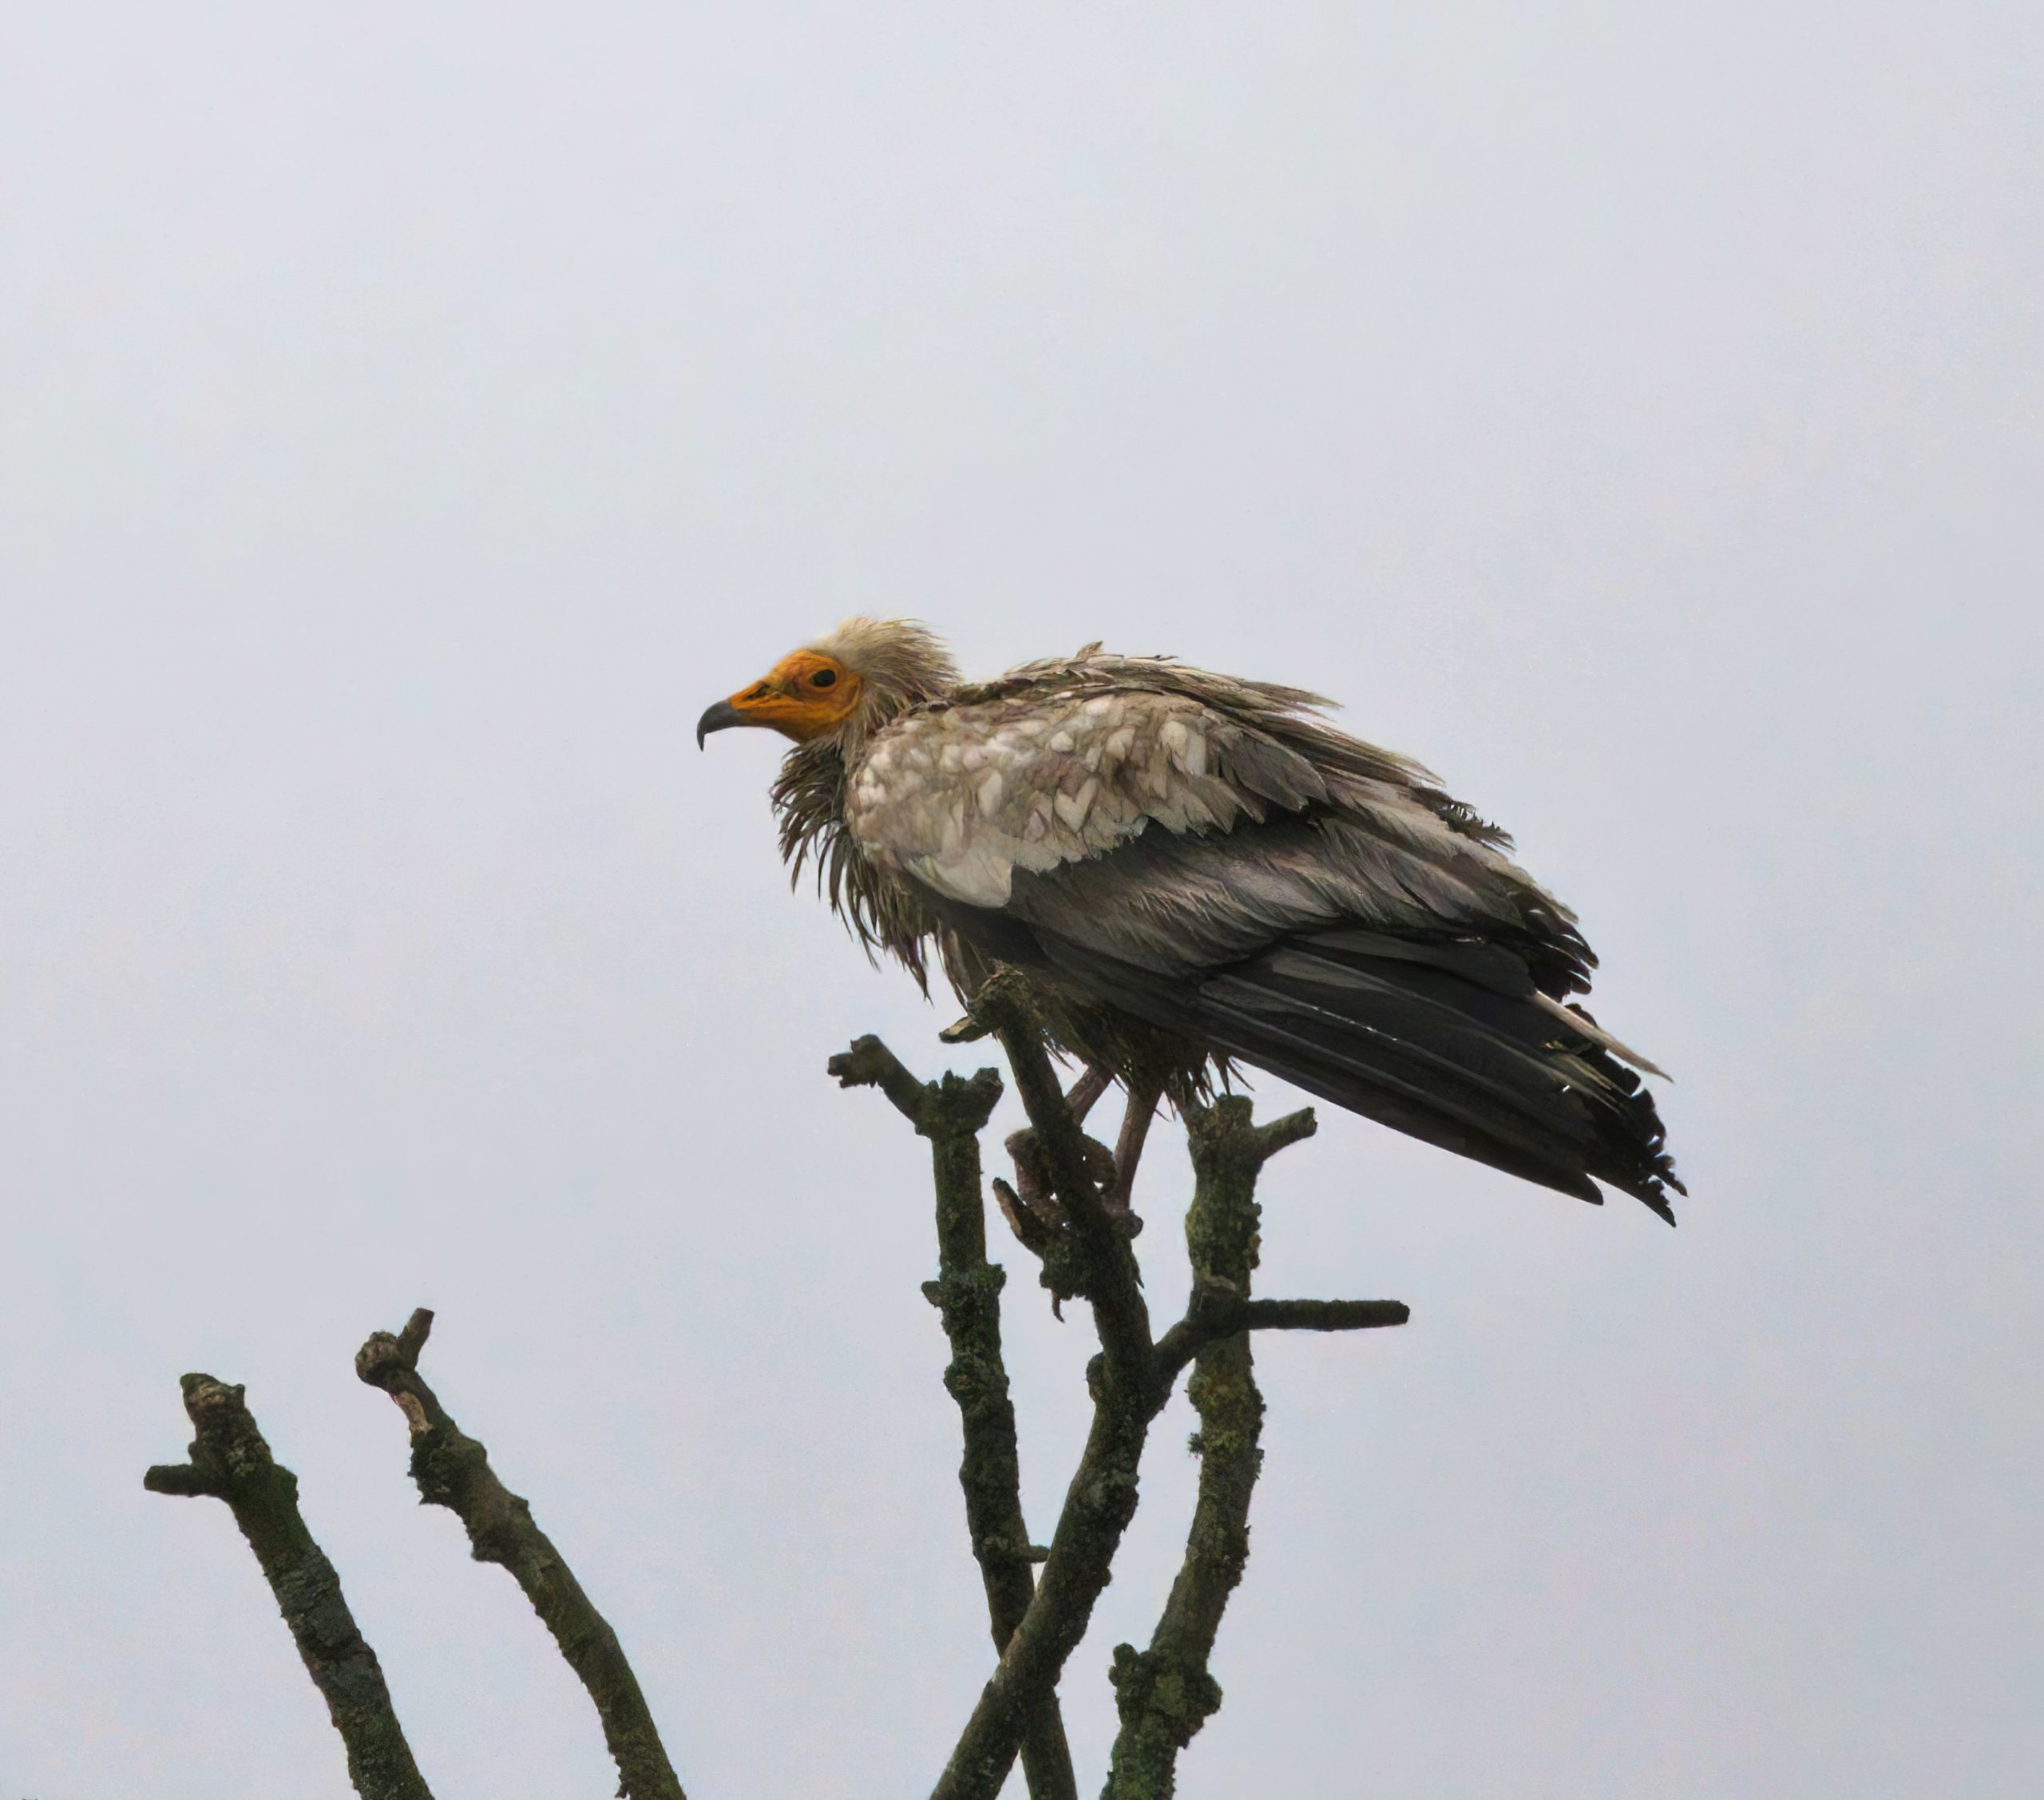 New Year’s Eve sighting of Egyptian Vulture in South Roscommon by National Parks and Wildlife Services Staff